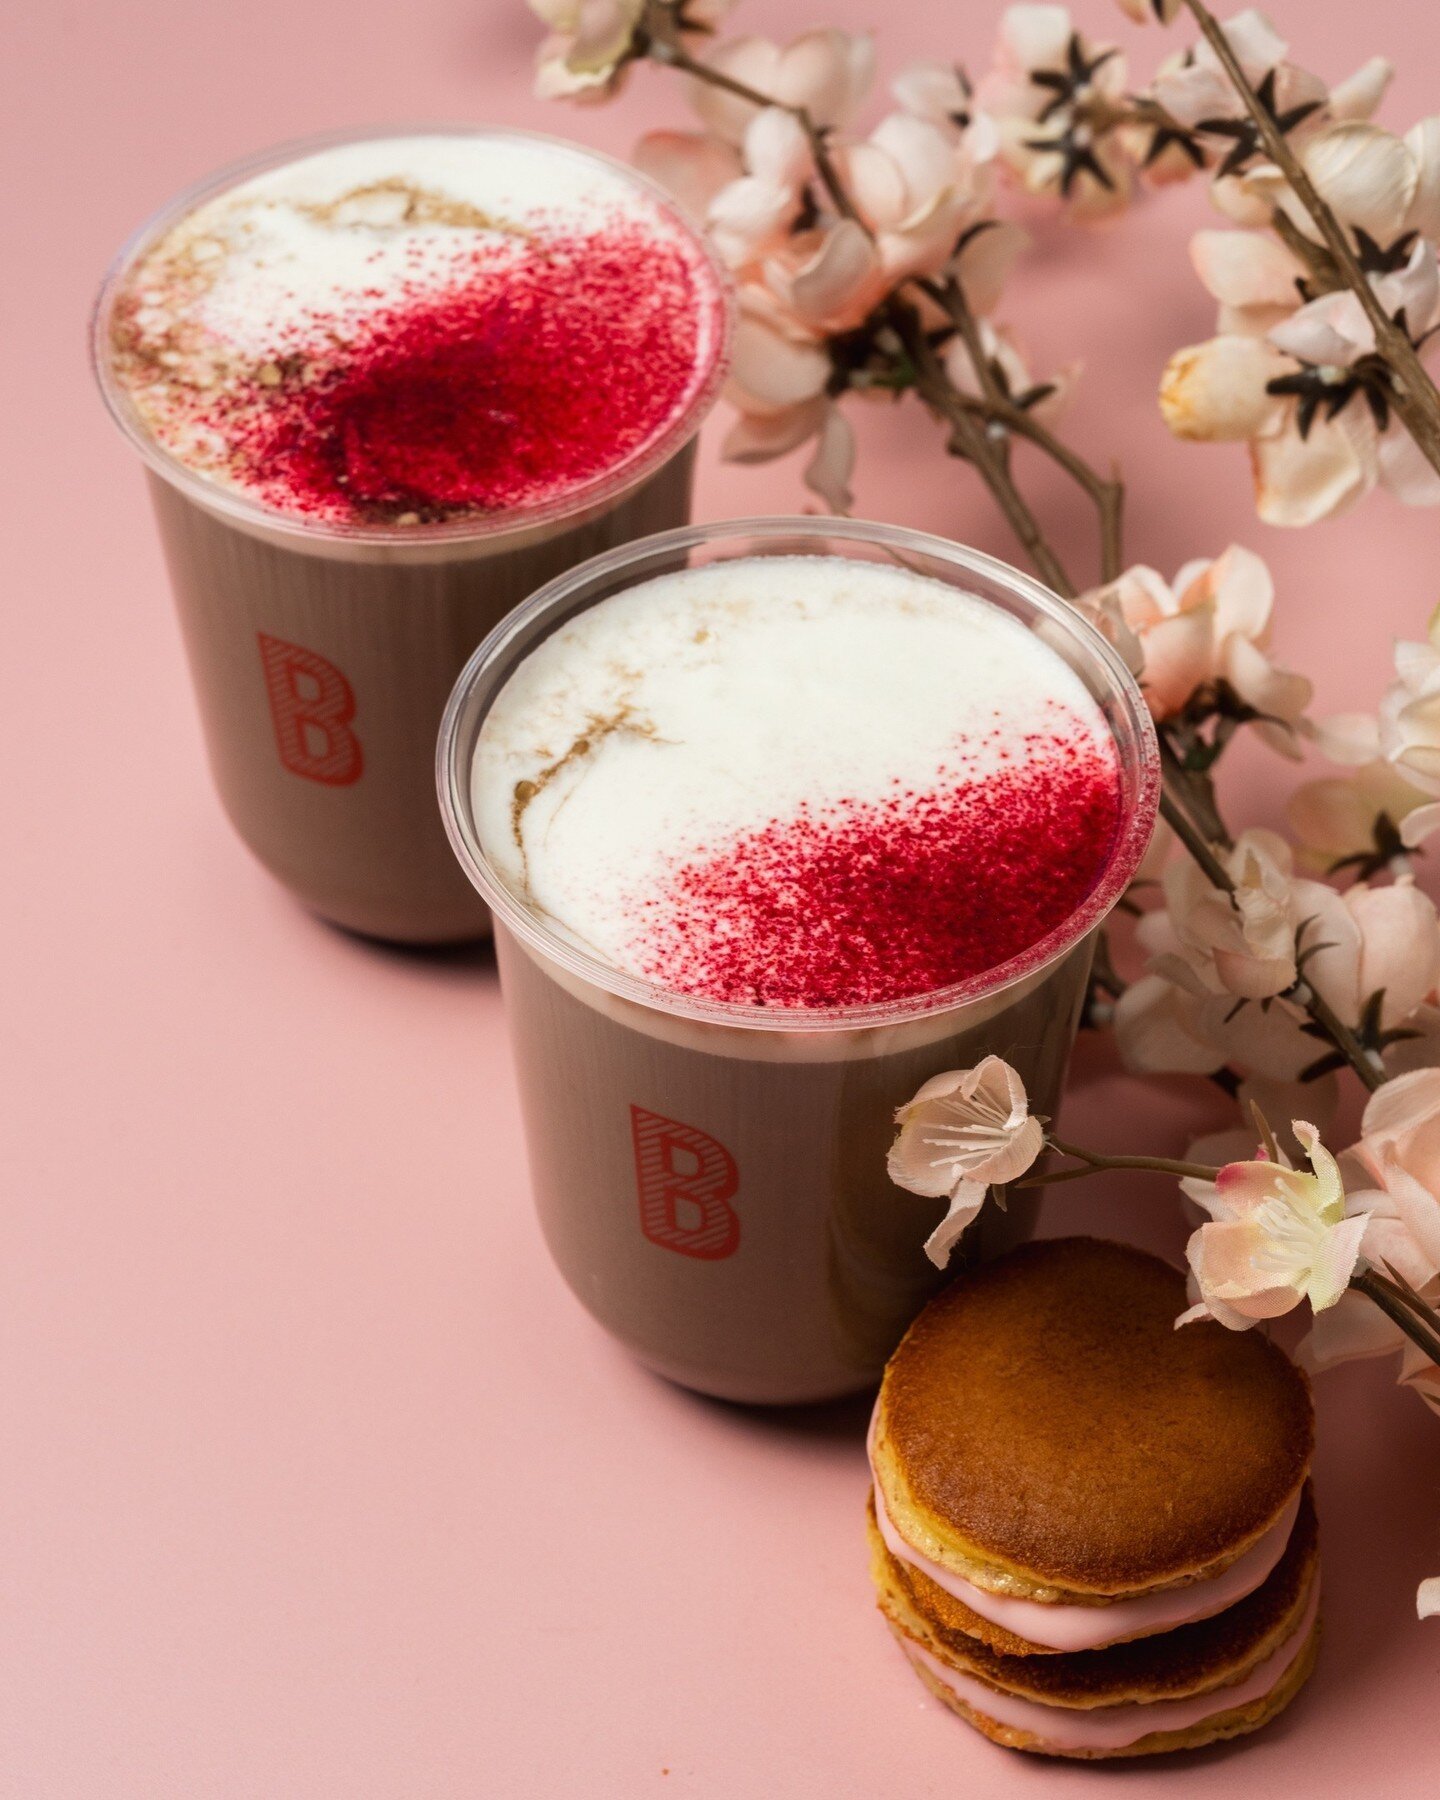 Take a sip as the cherry blossoms bloom ~ Hanami Set with iced hojicha latte with sea salt foam and a mini dorayaki filled with cherry blossom ganache.

Available for a limited time at both bakery locations 🌸⁠
⁠
#yvreats #vancouverfoodie #dishedvan 